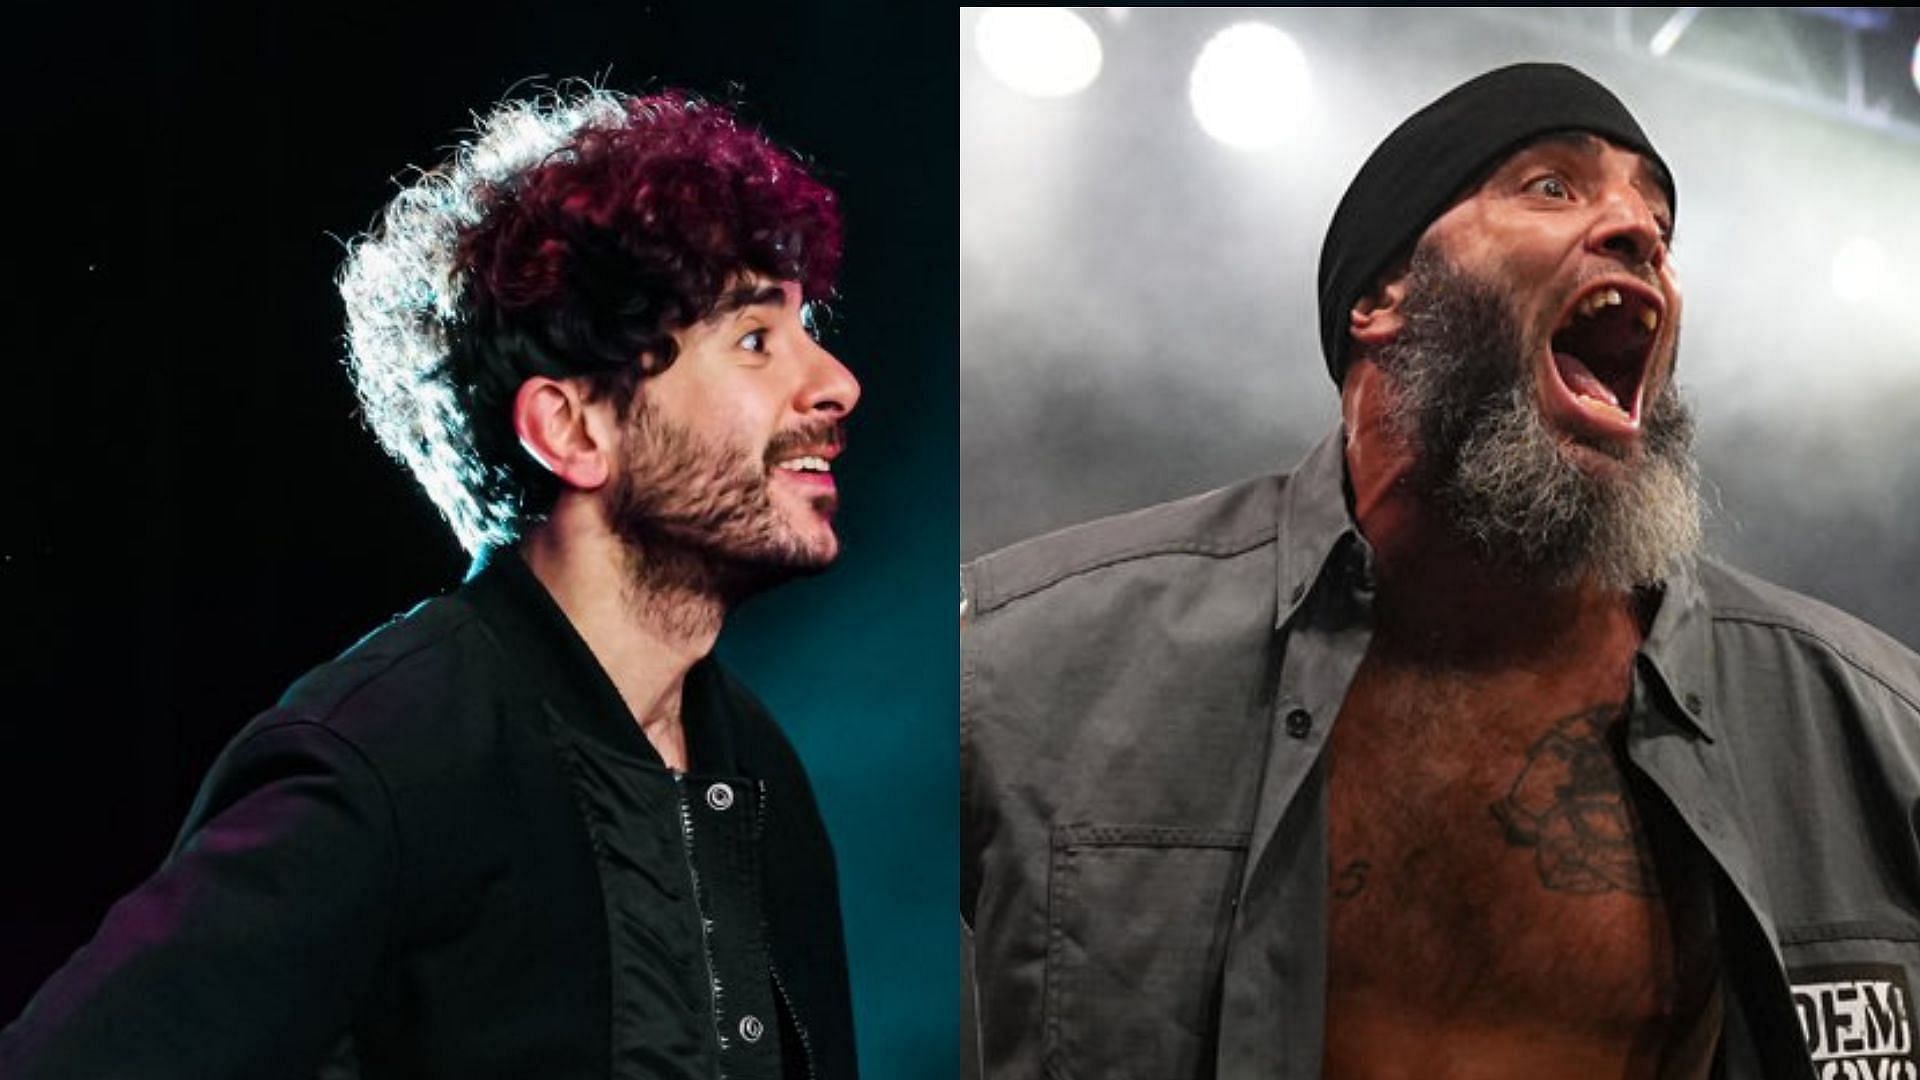 Mark Briscoe will be making his AEW debut